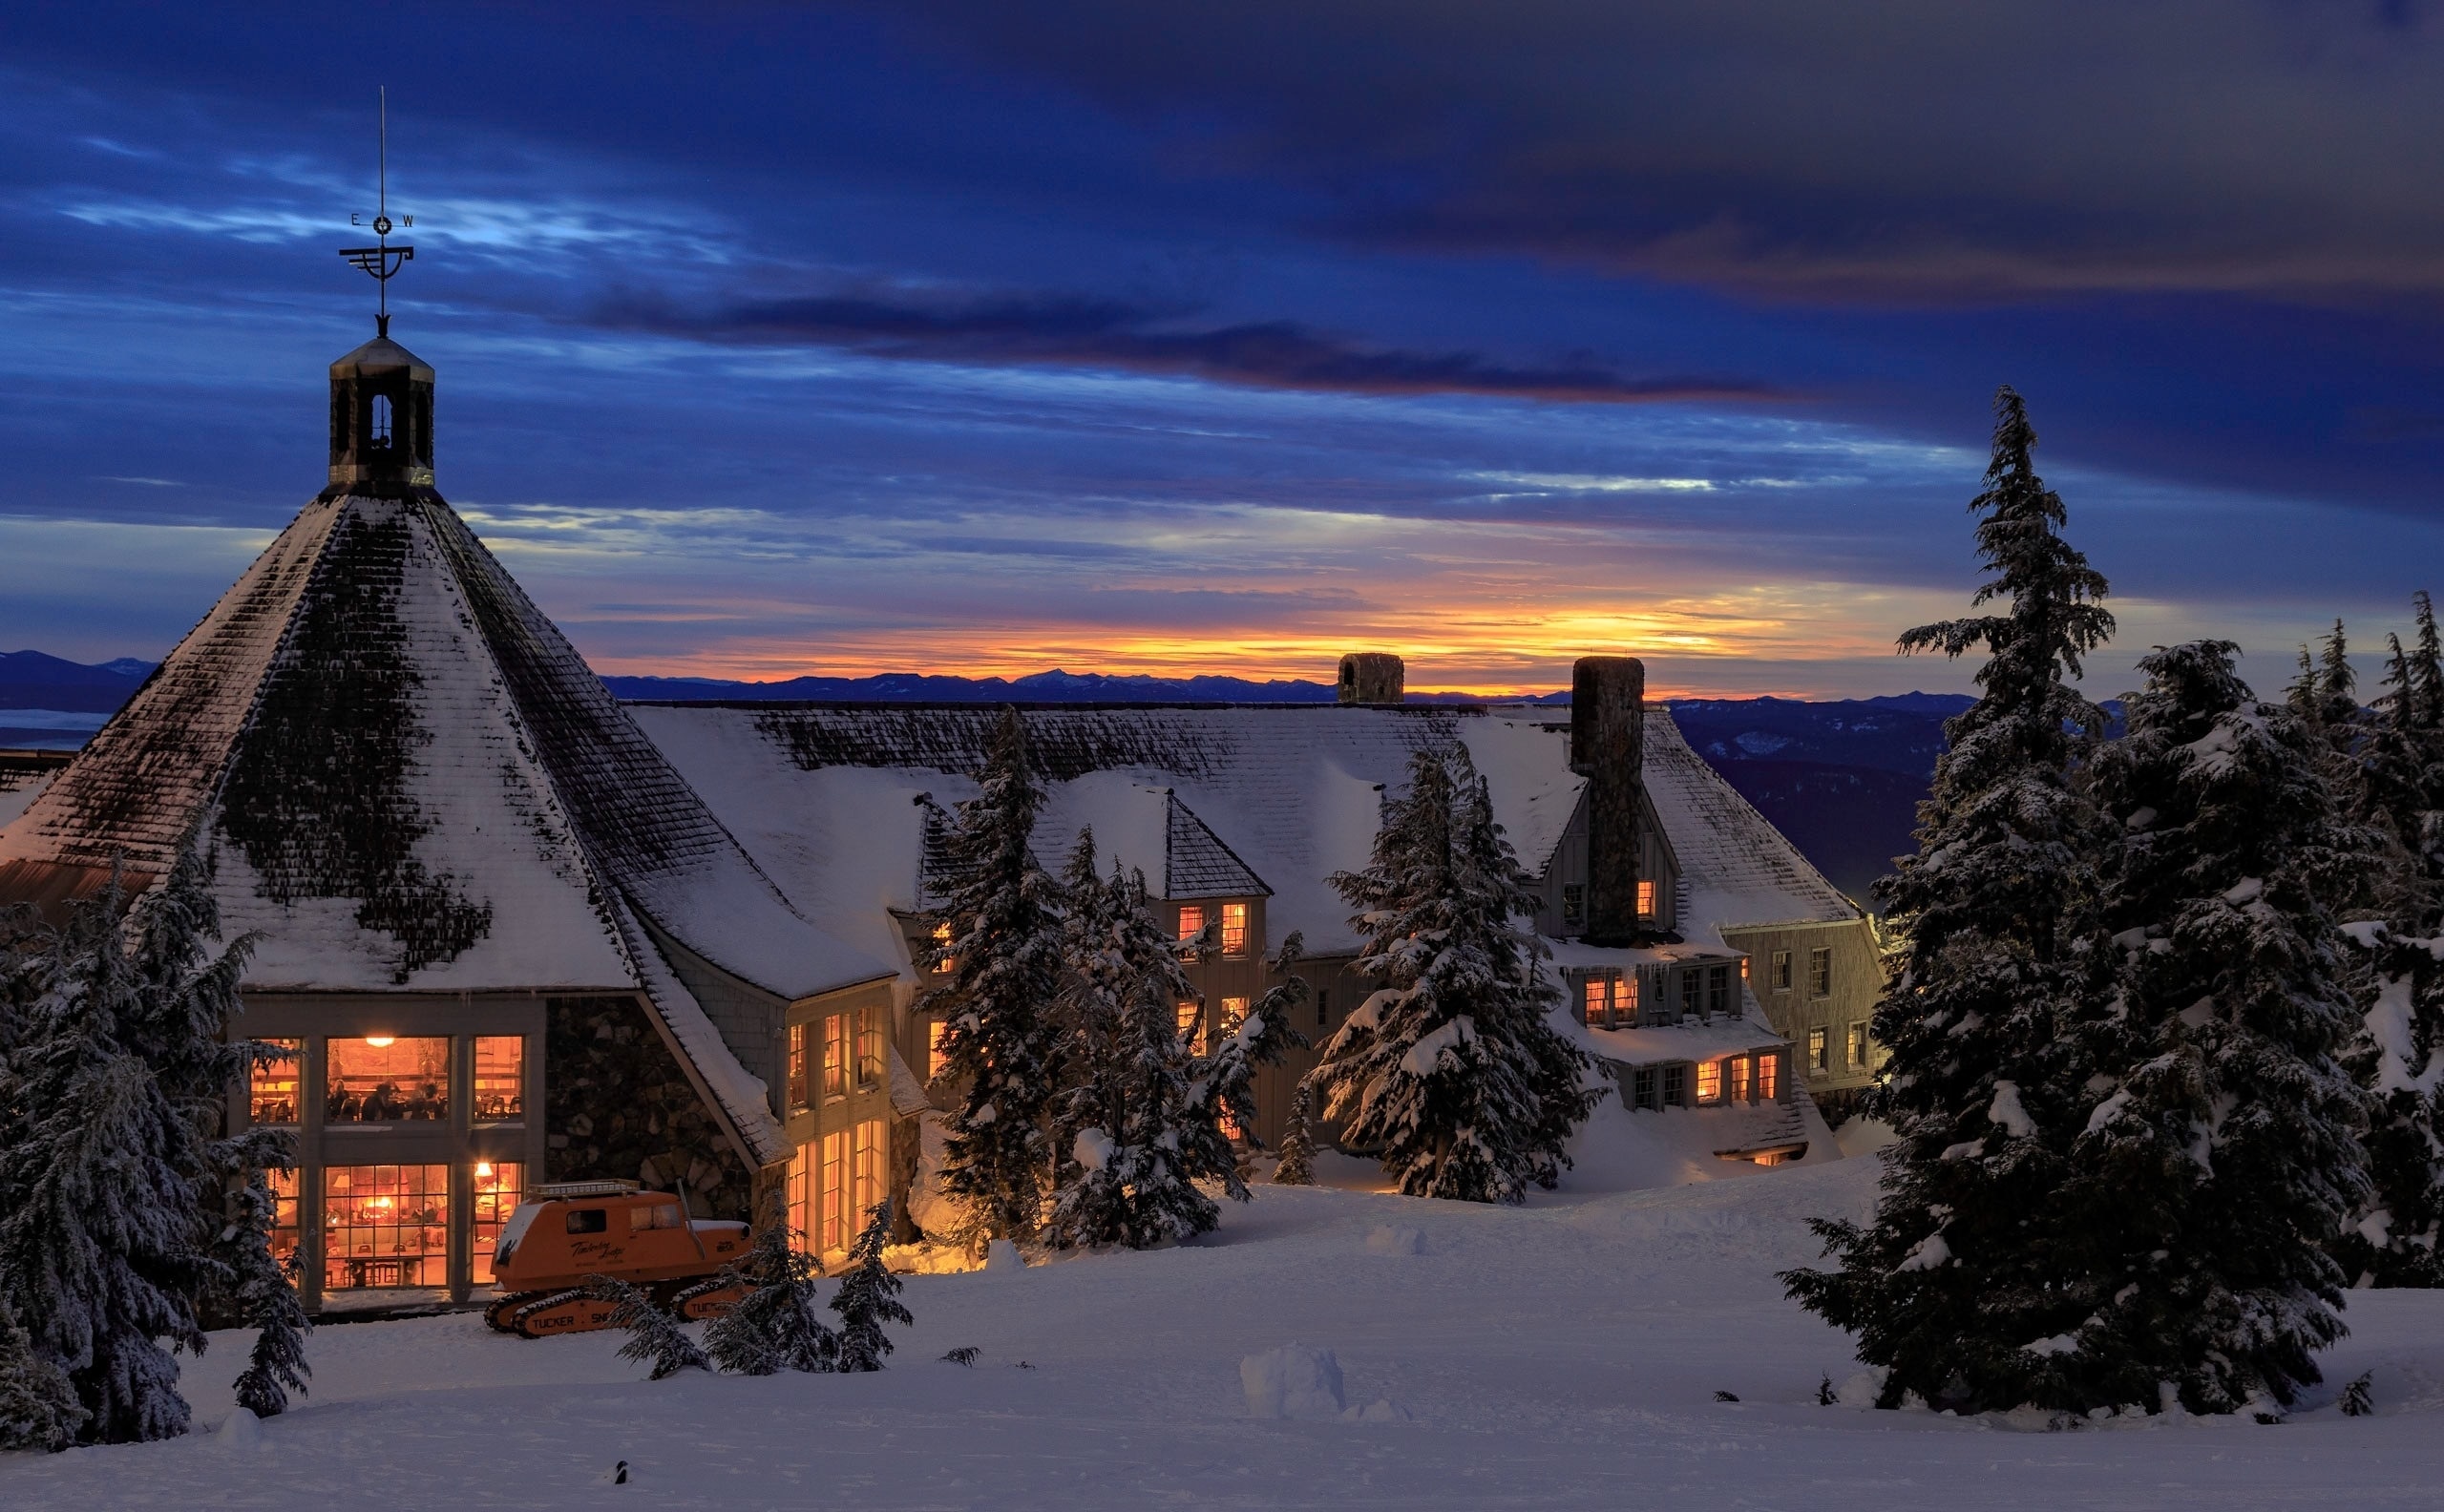 Timberline Lodge in a cold January twilight. Looks so cozy in there with the warm, crackling fires. I froze my butt off getting this shot, but I still would not have had it any other way. #adventure #oregon #lodge #pnw #mthood